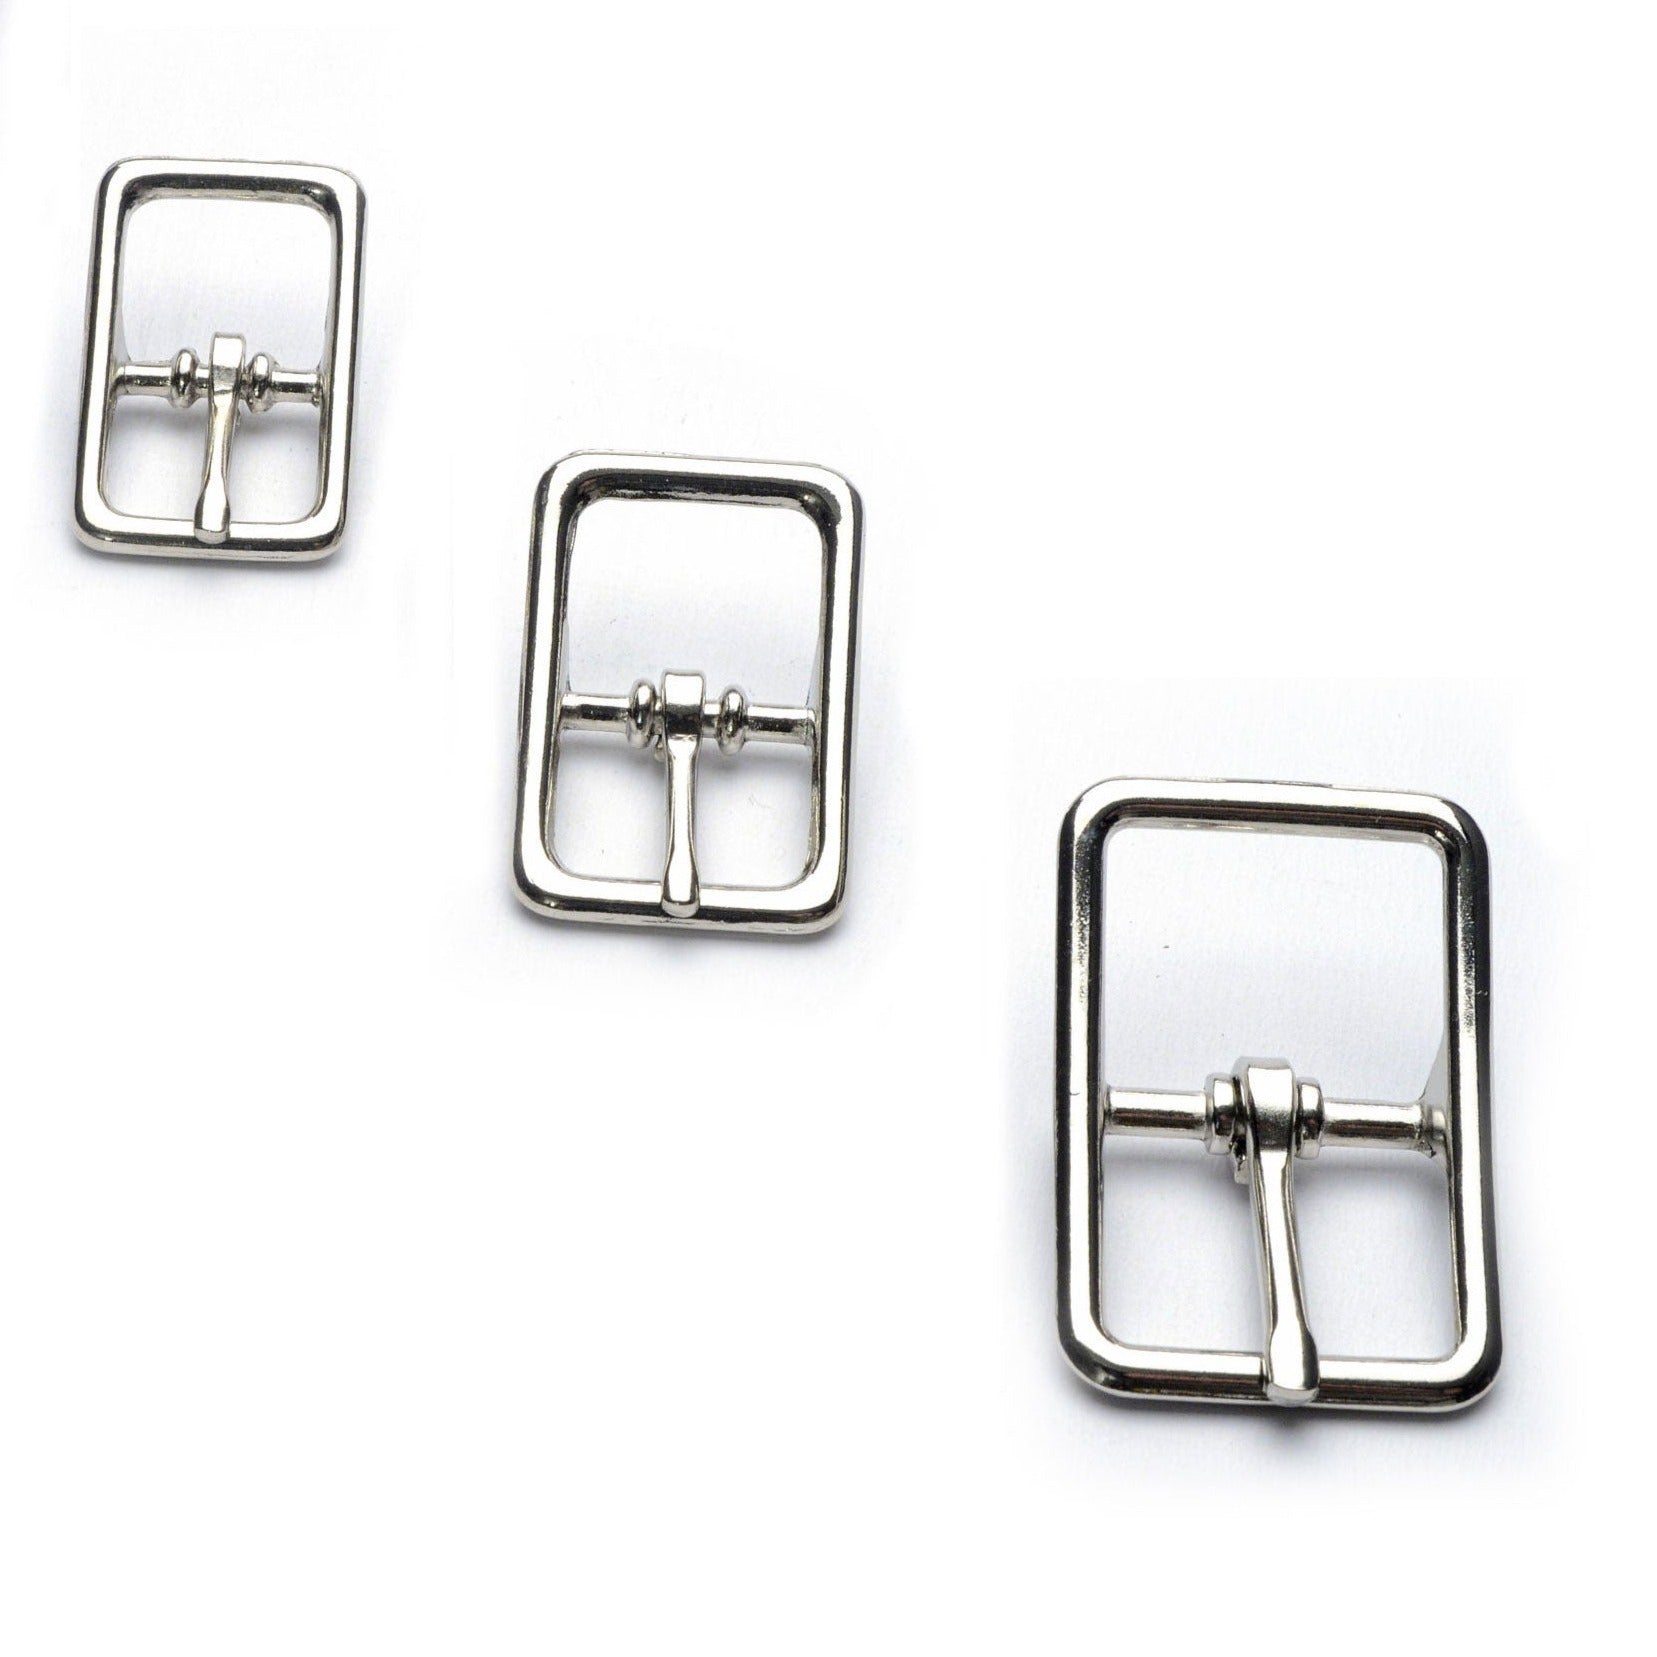 Centre Bar Nickel Strap Buckles from Identity Leathercraft